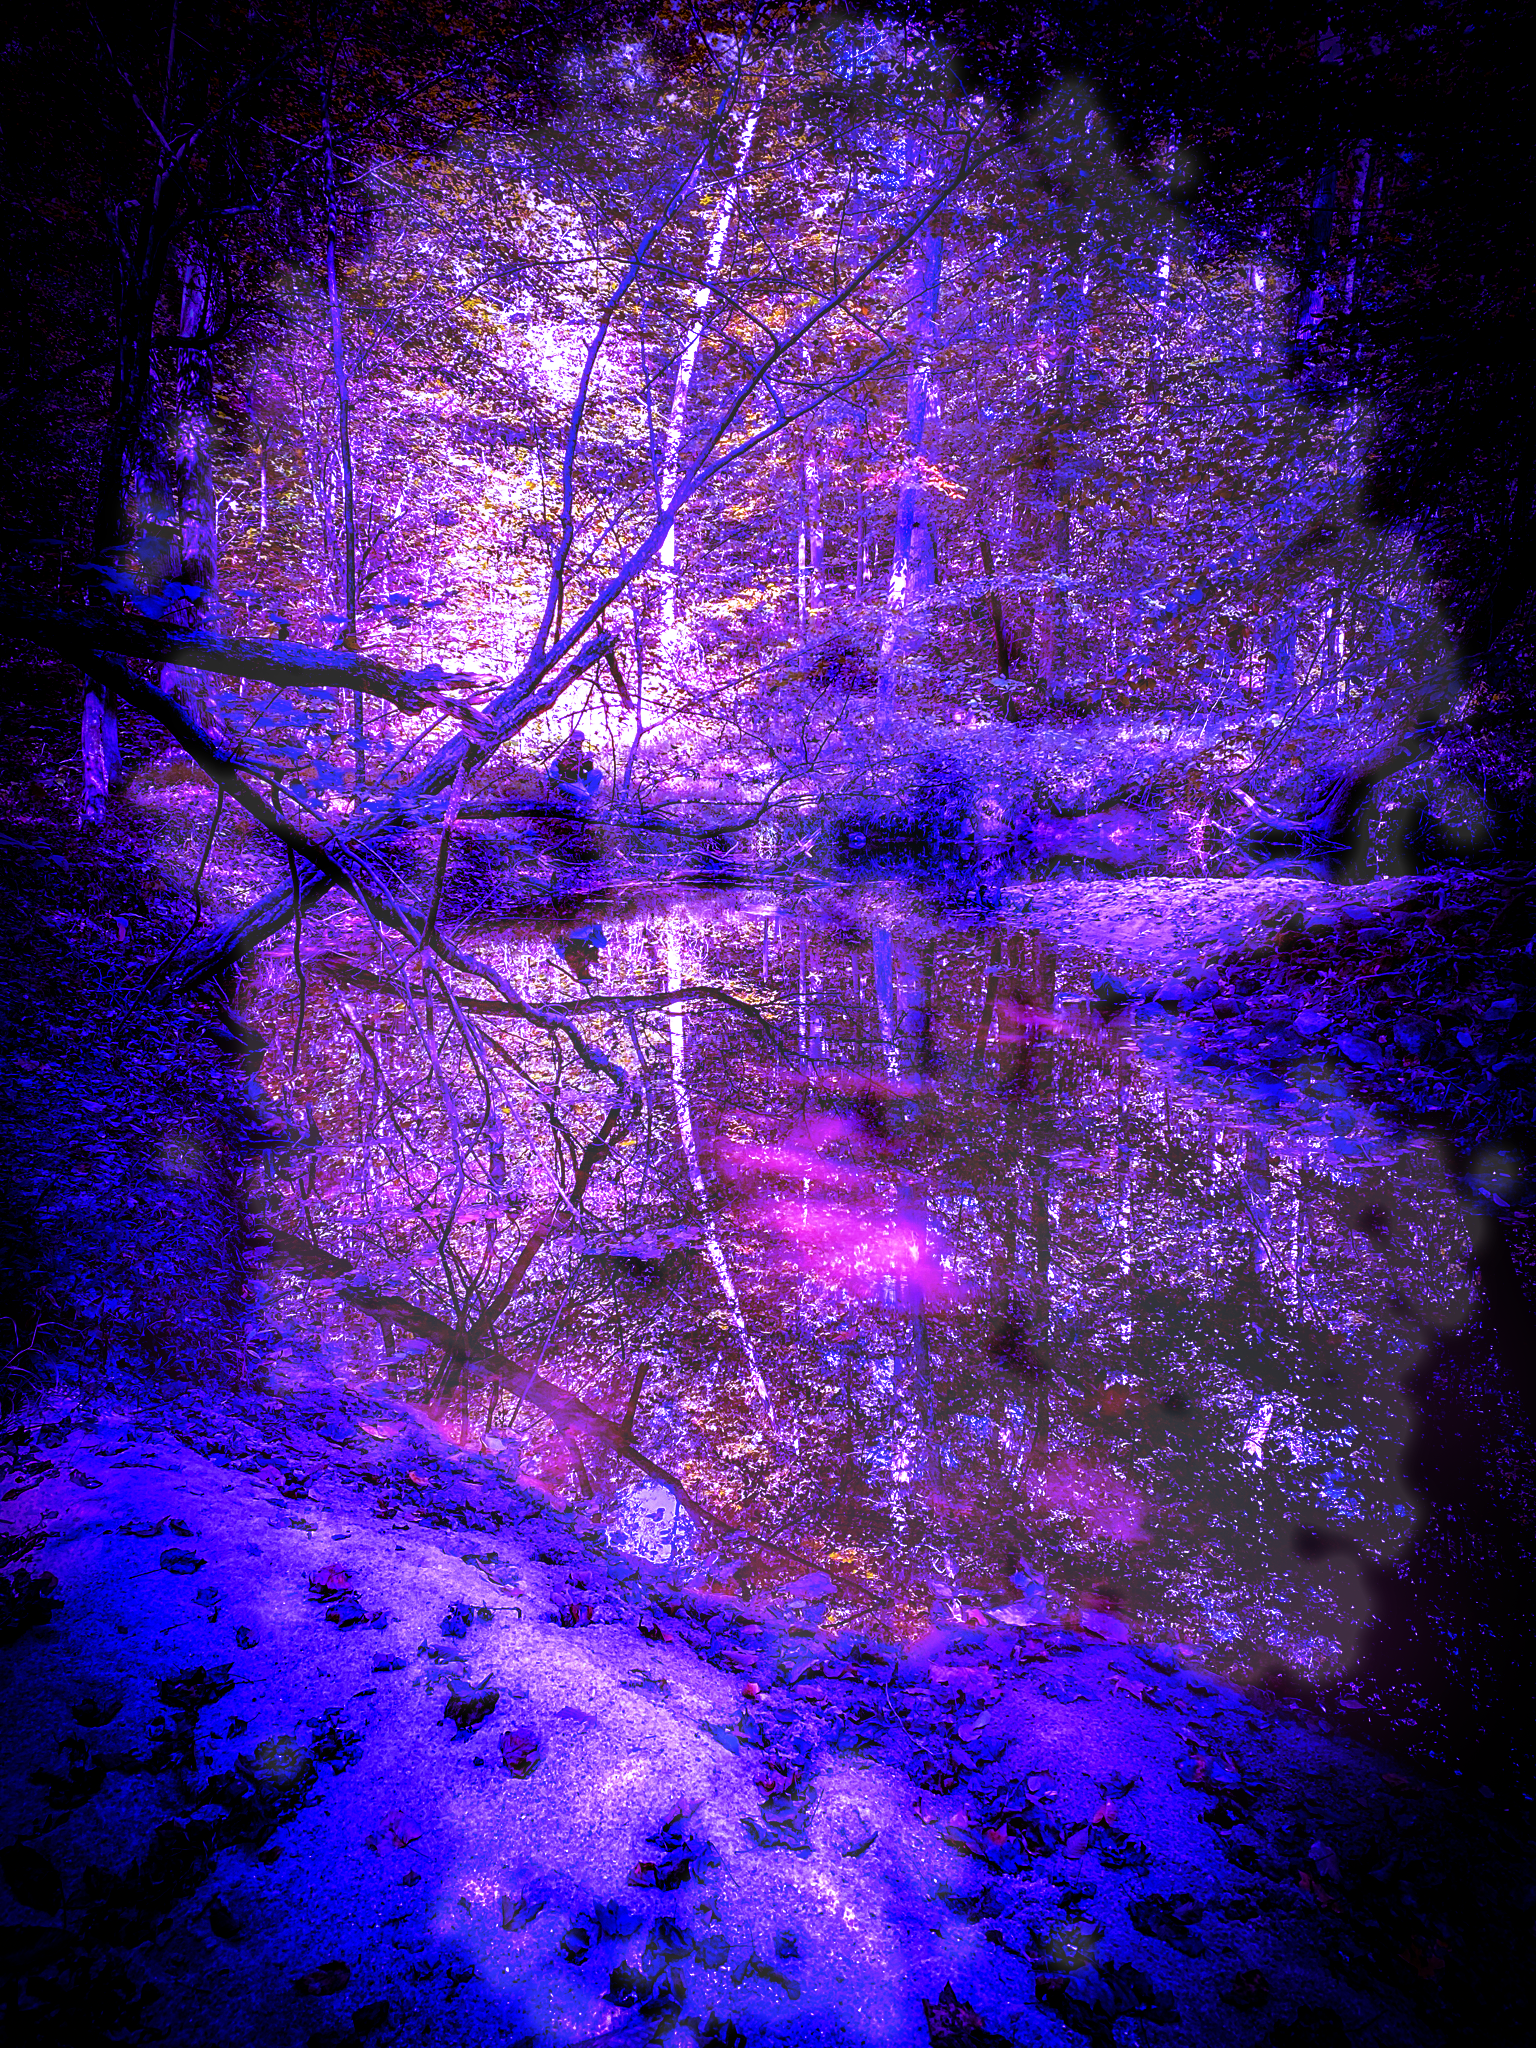 Artwork of trees and a pond in a purple hue